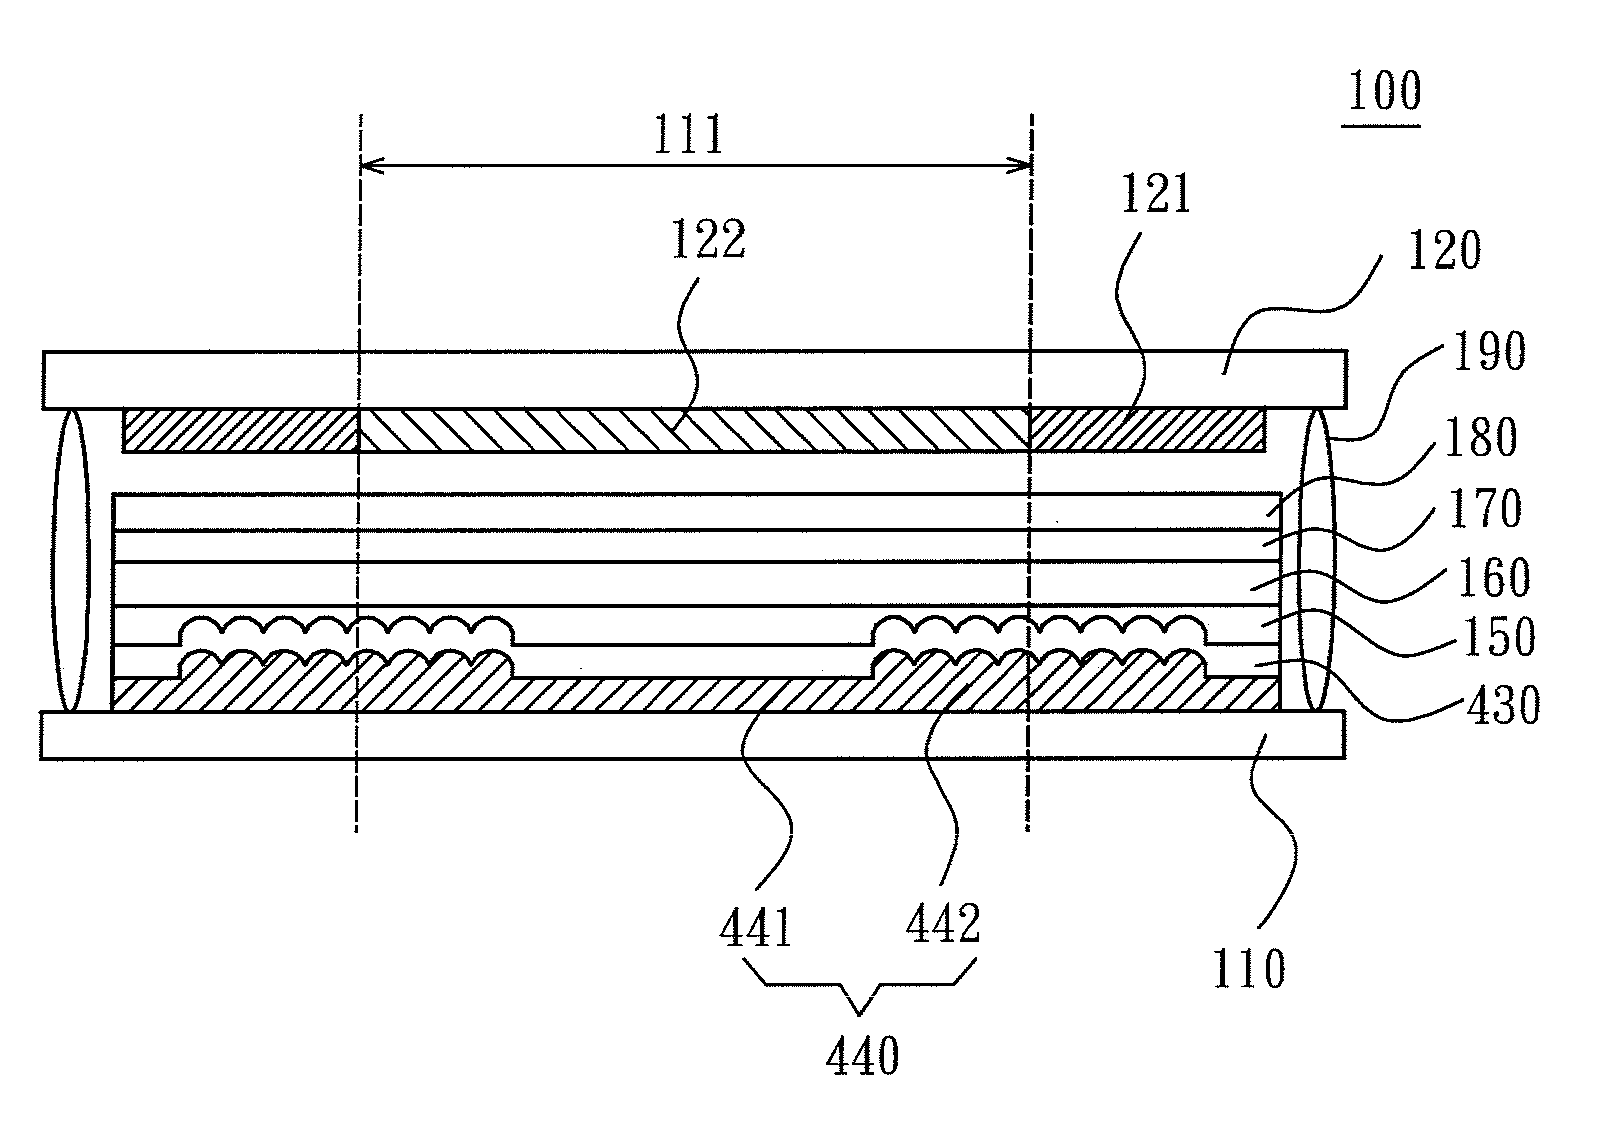 Display device and electrical apparatus